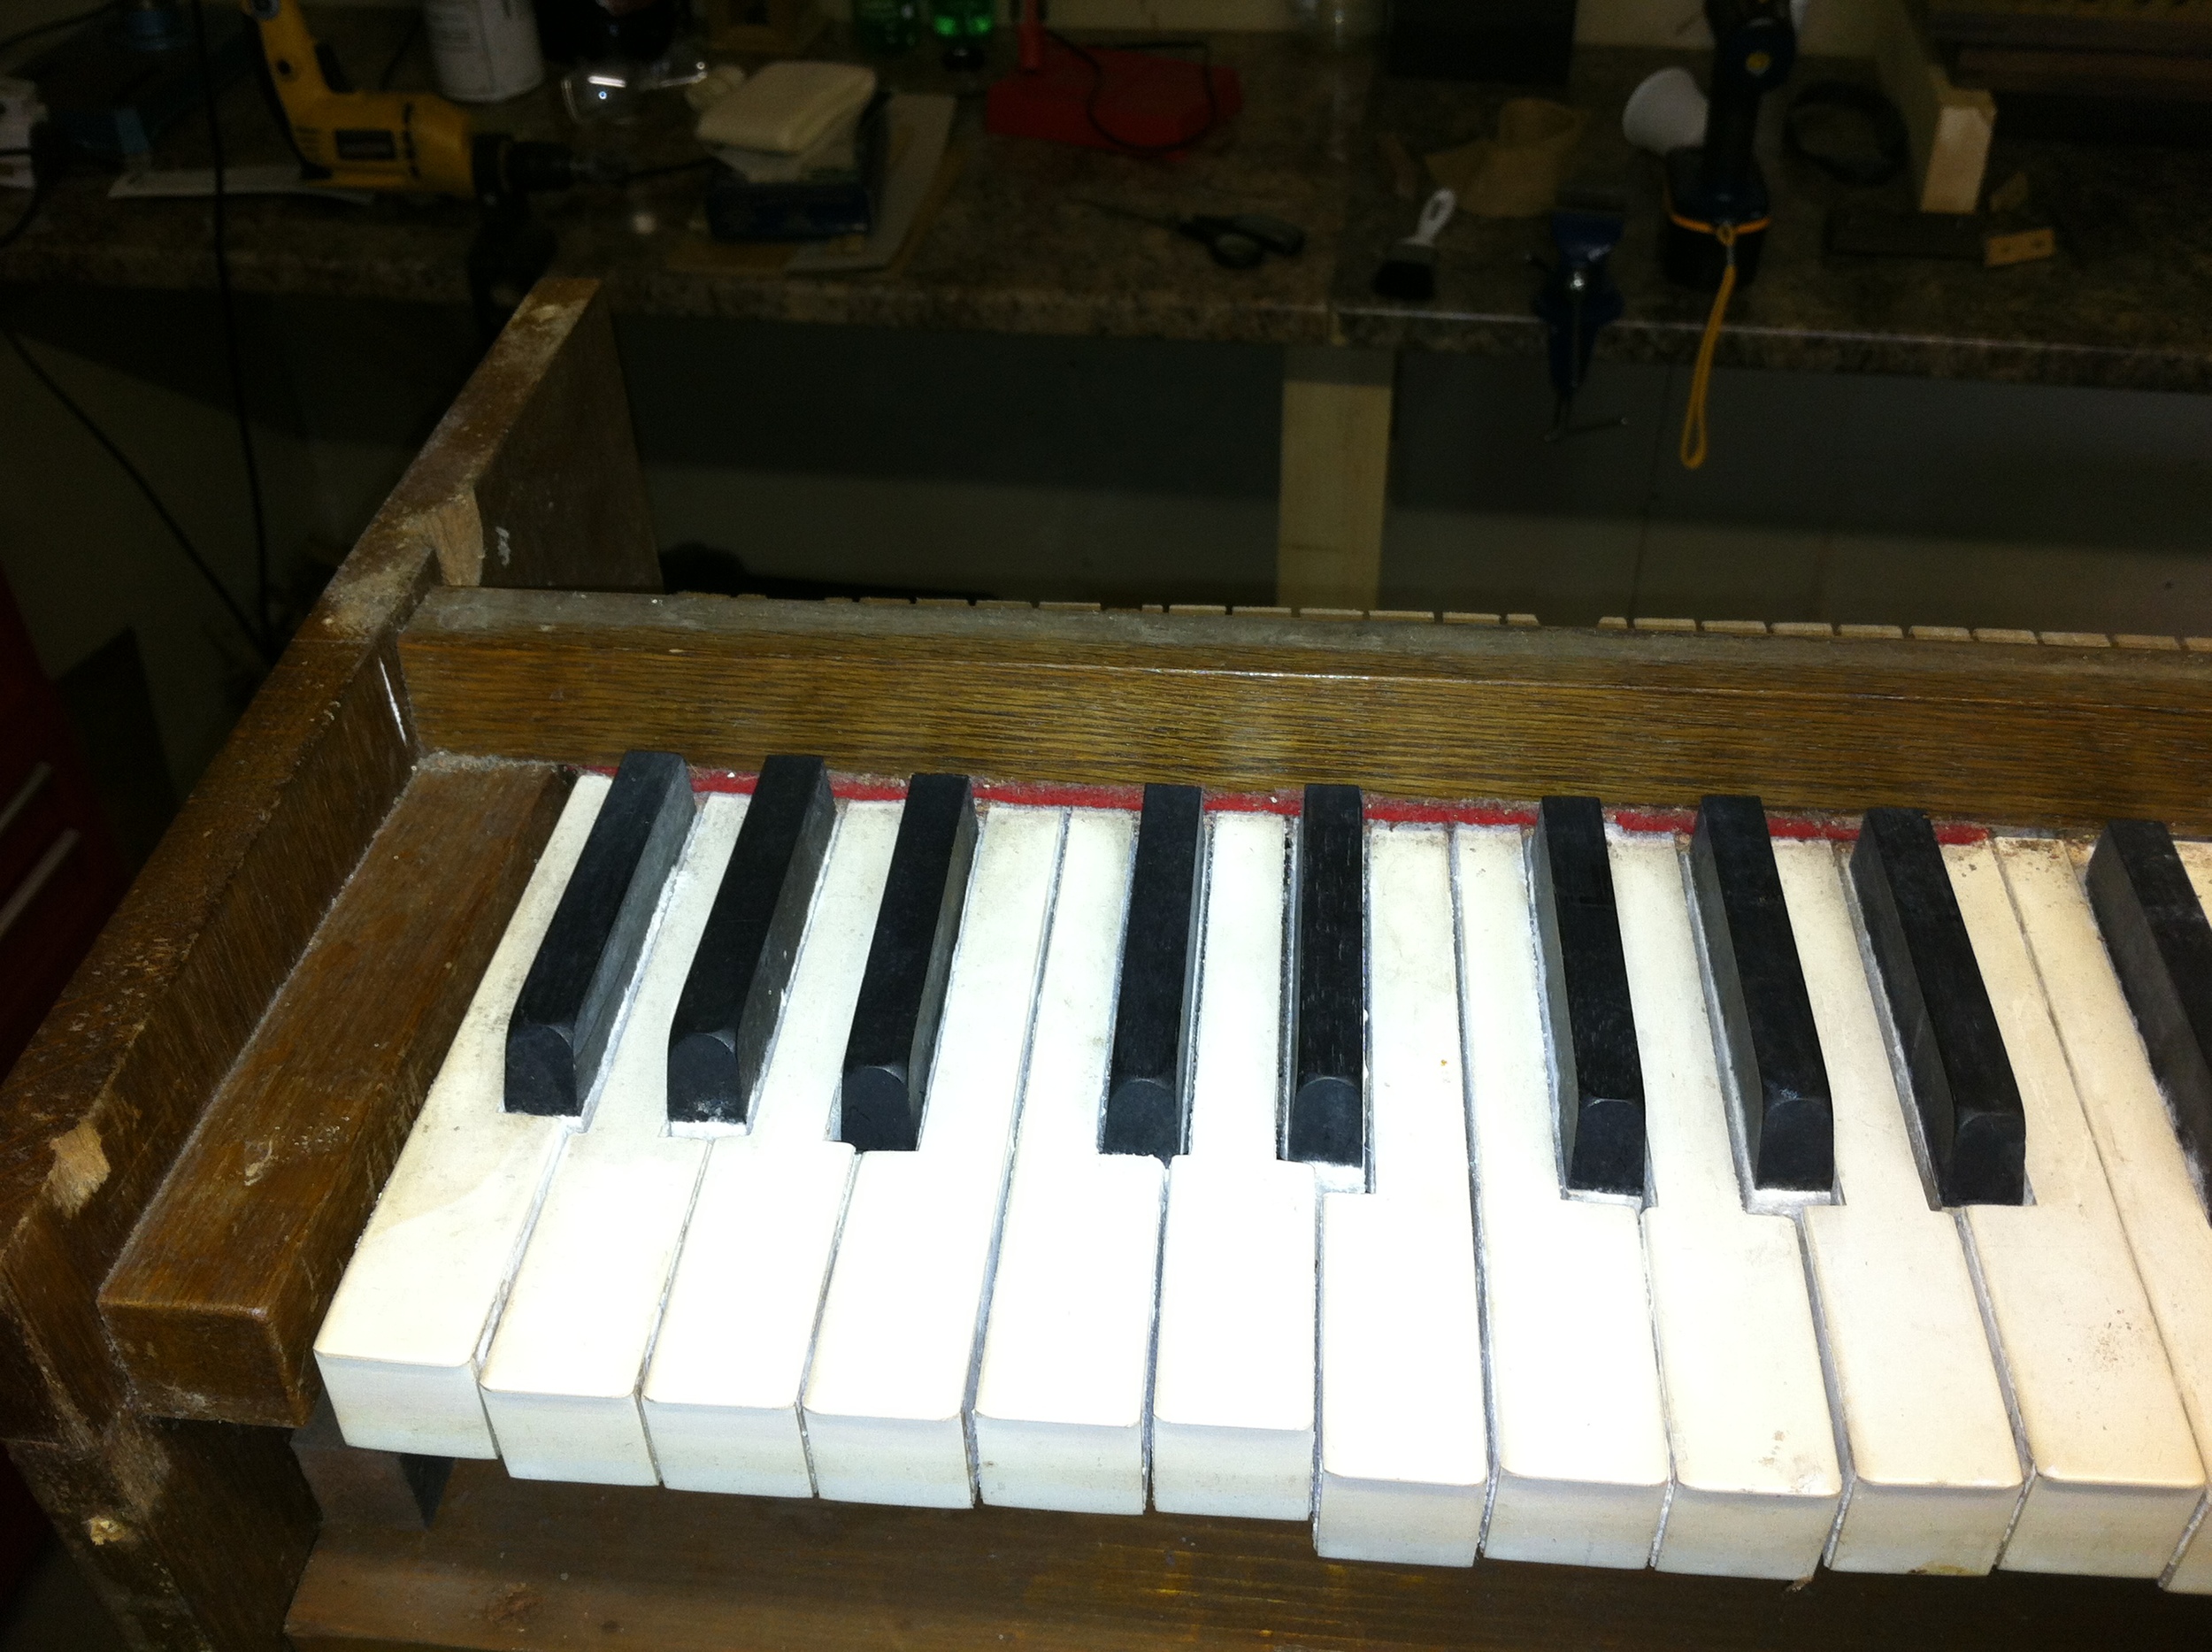  The keys were stuck together with white fuzz from dampness 